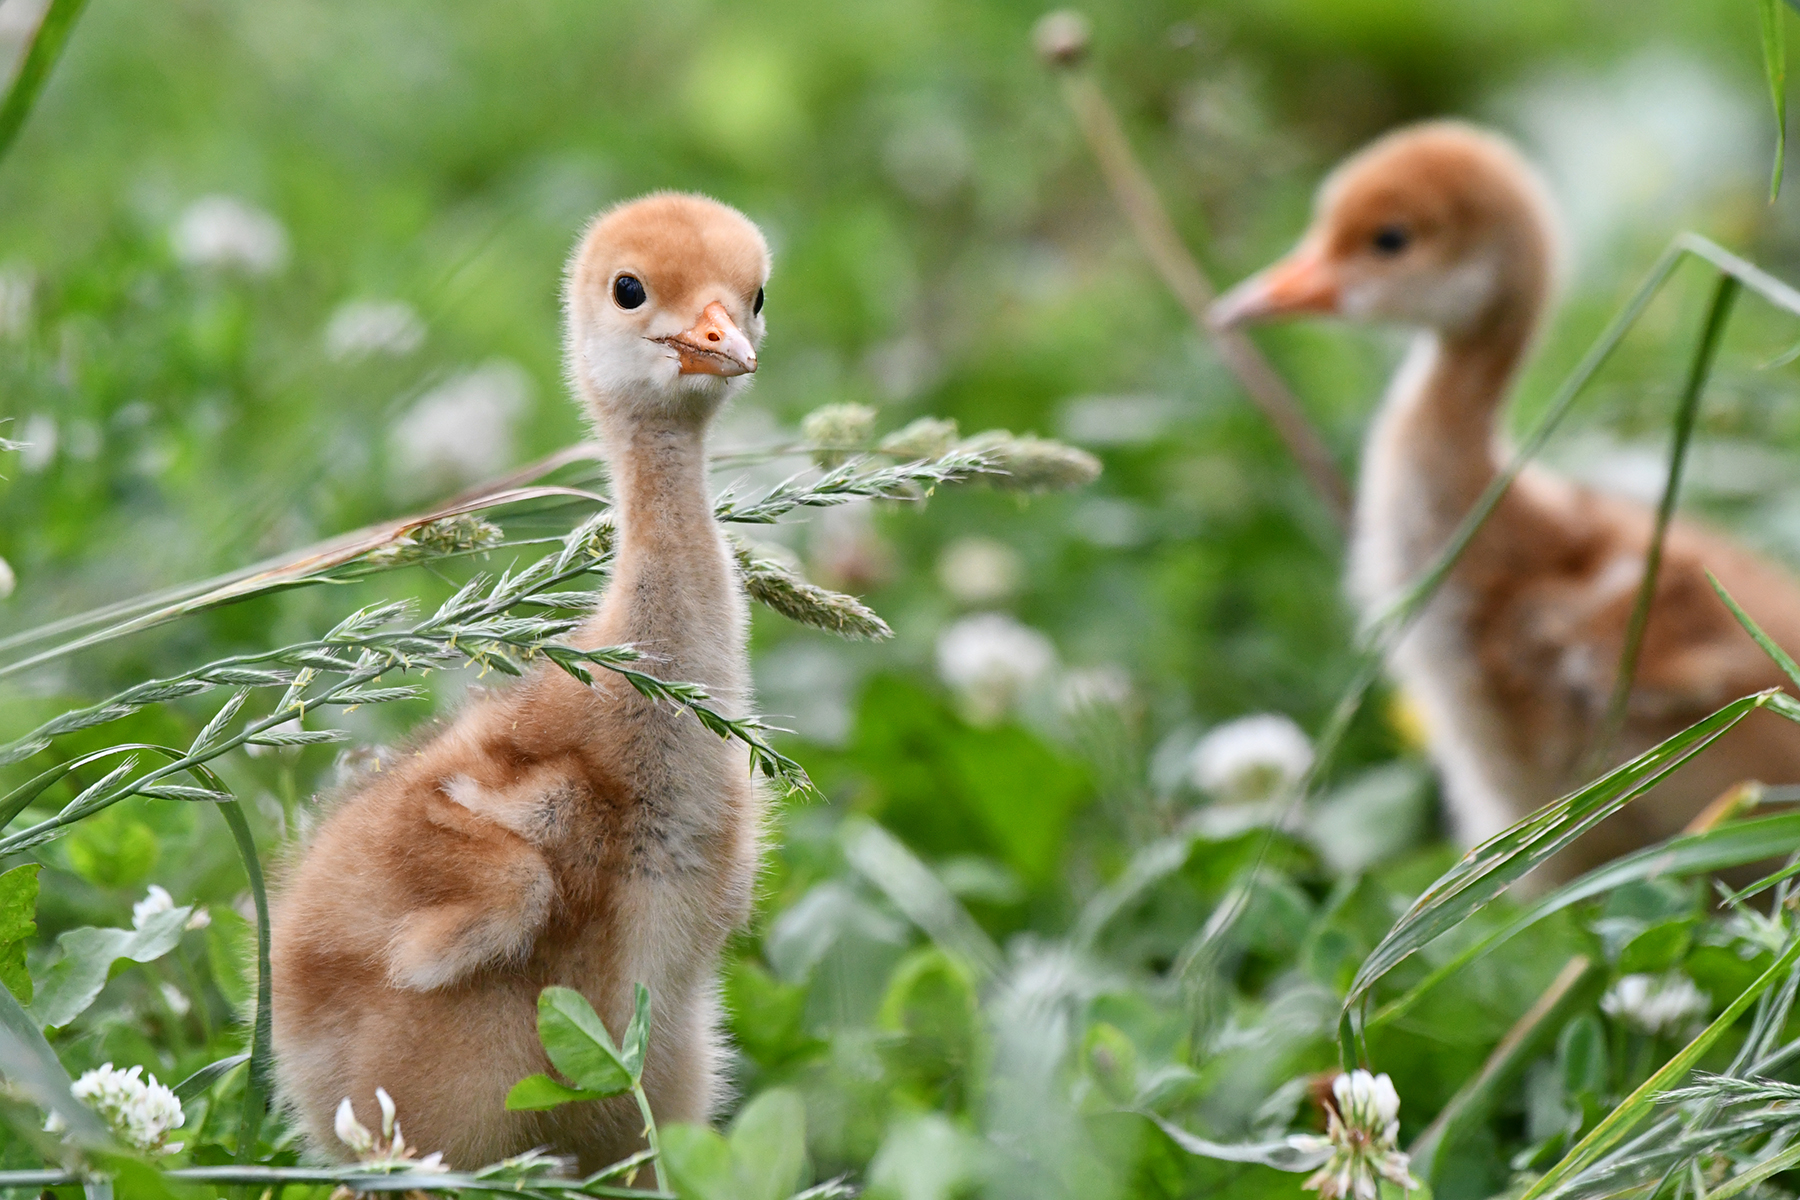 Two red-crowned crane chicks among a field of grasses and clovers.